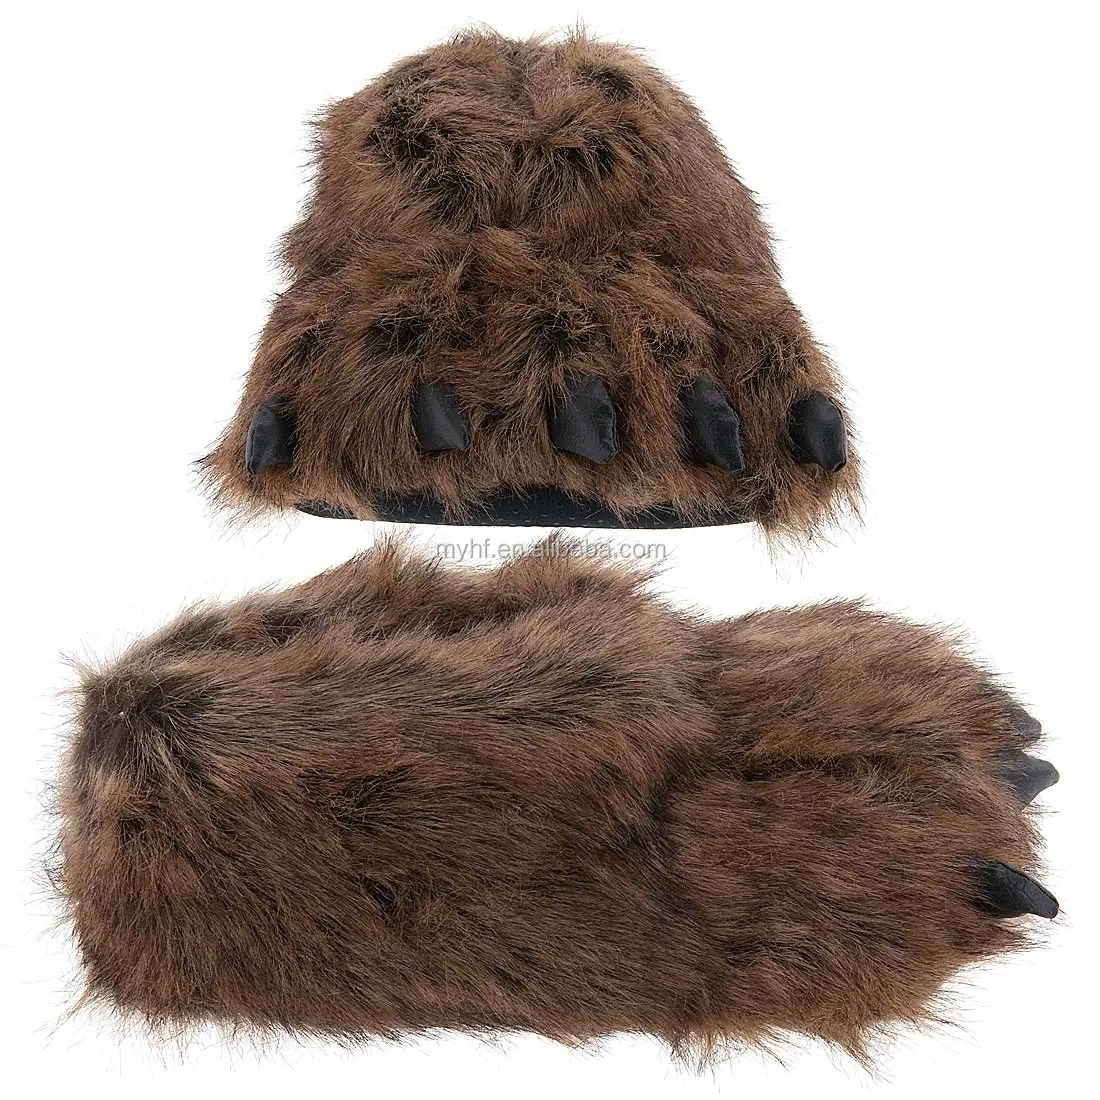 Grizzly Paw Slippers For Women And Men - Buy Bear Paw Slippers,Slippers For Women,Slippers For Man on